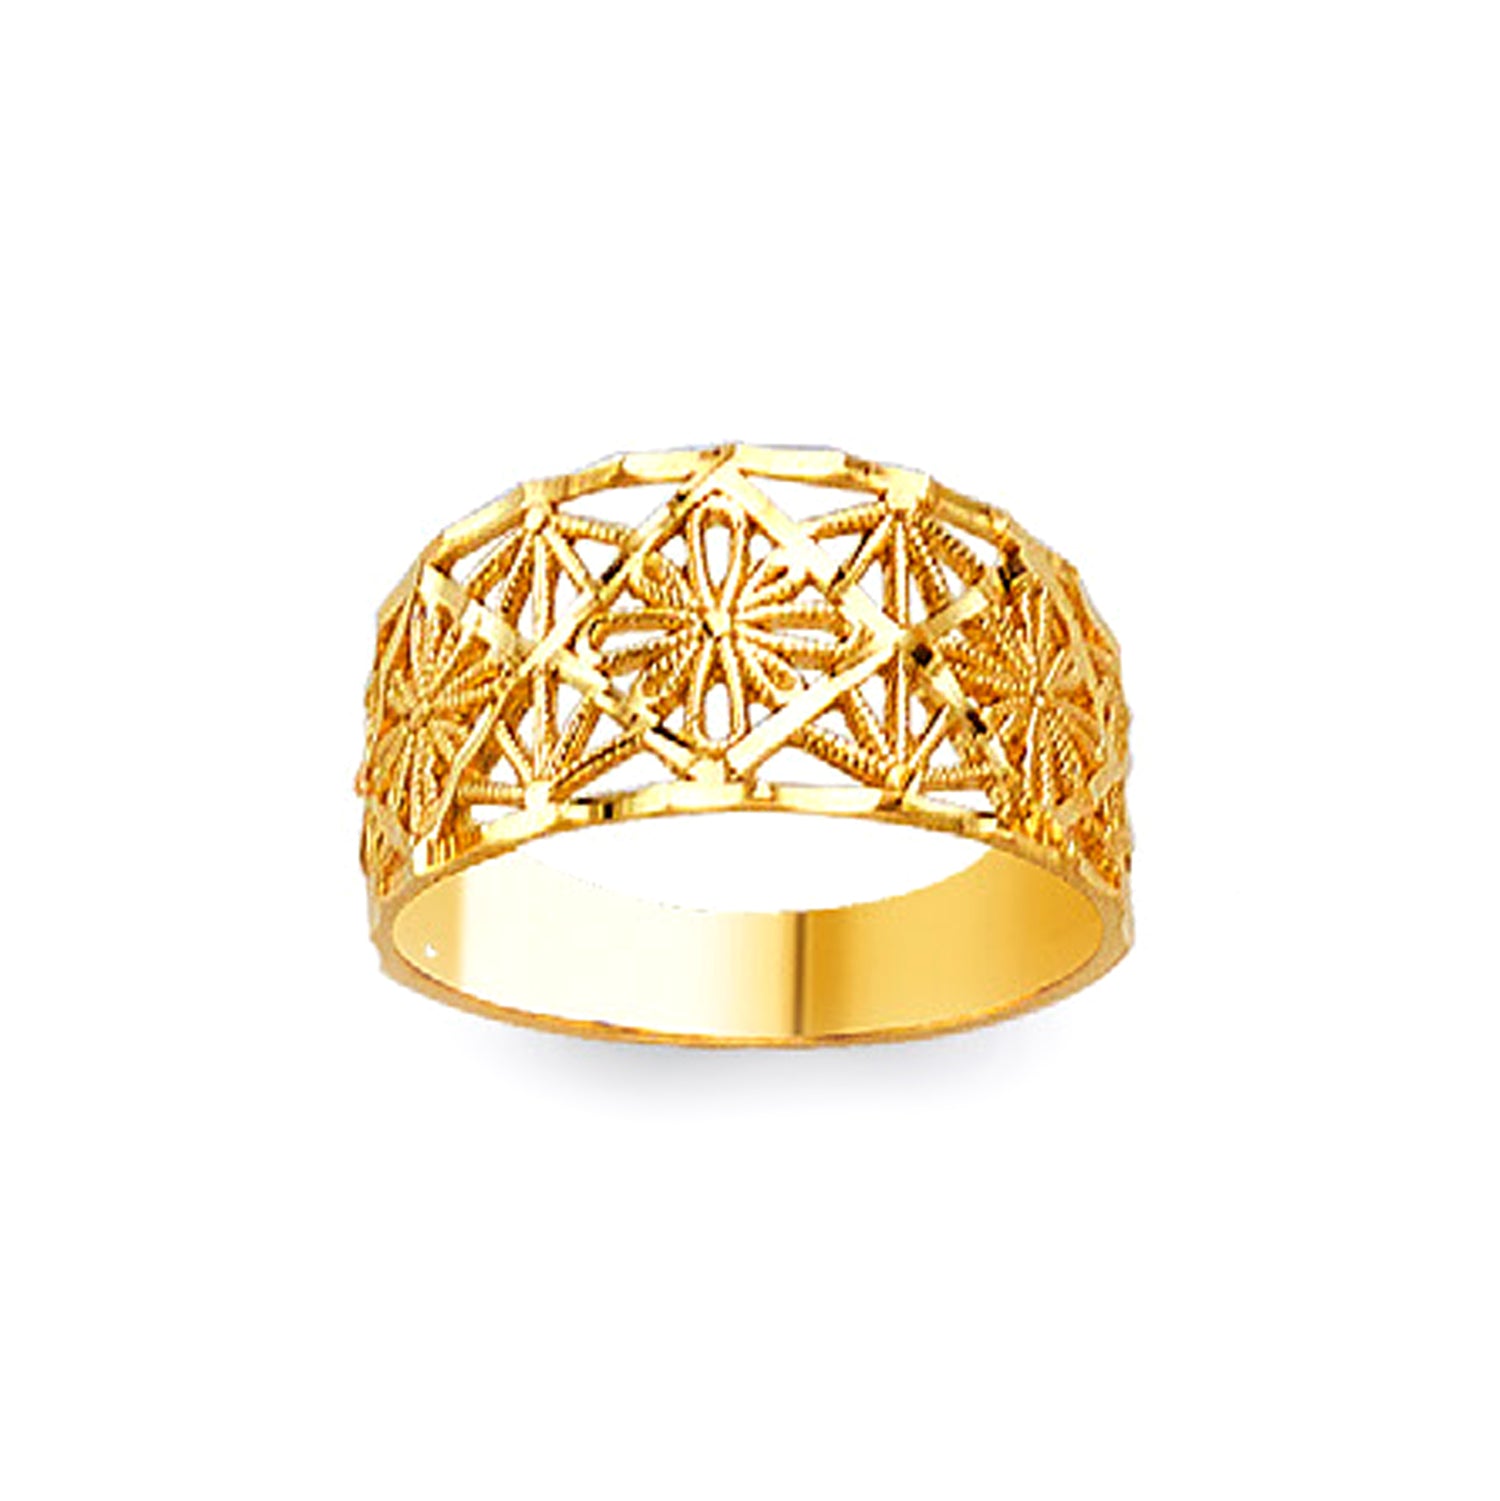 Lattice Love Band in Solid Gold 